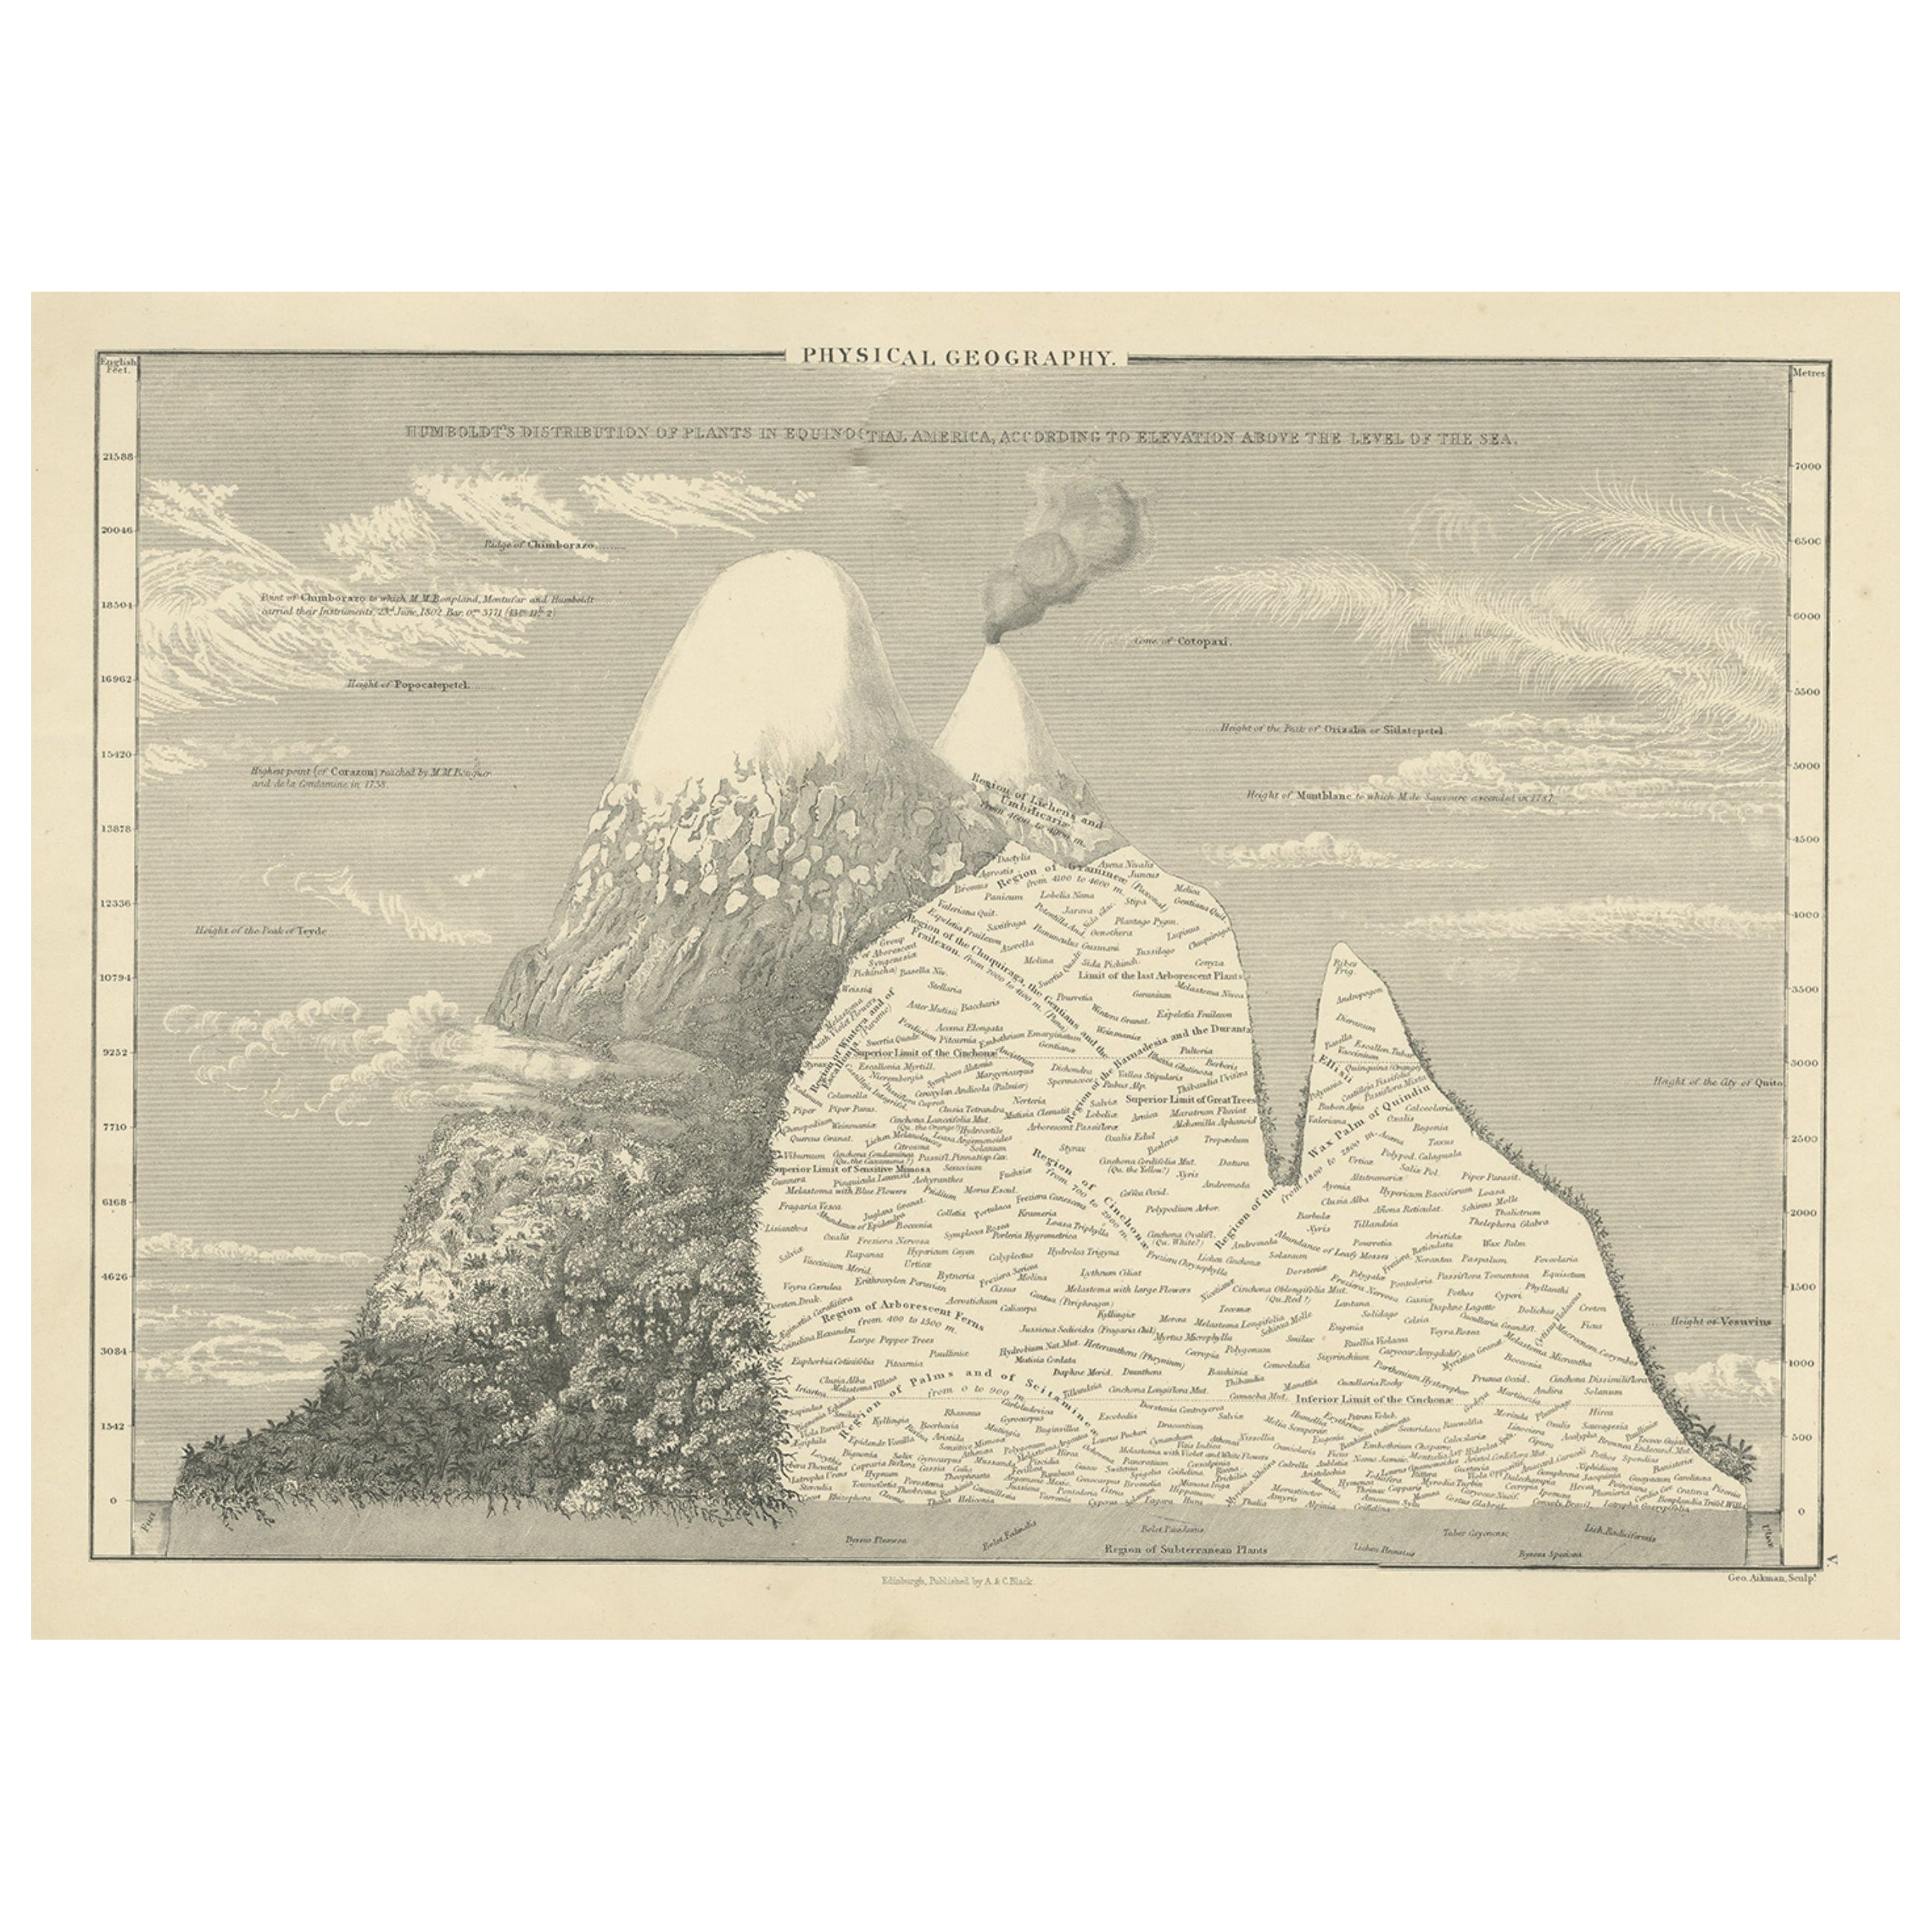 Antique Print of an Elevational Profile Near the Equator, 1854